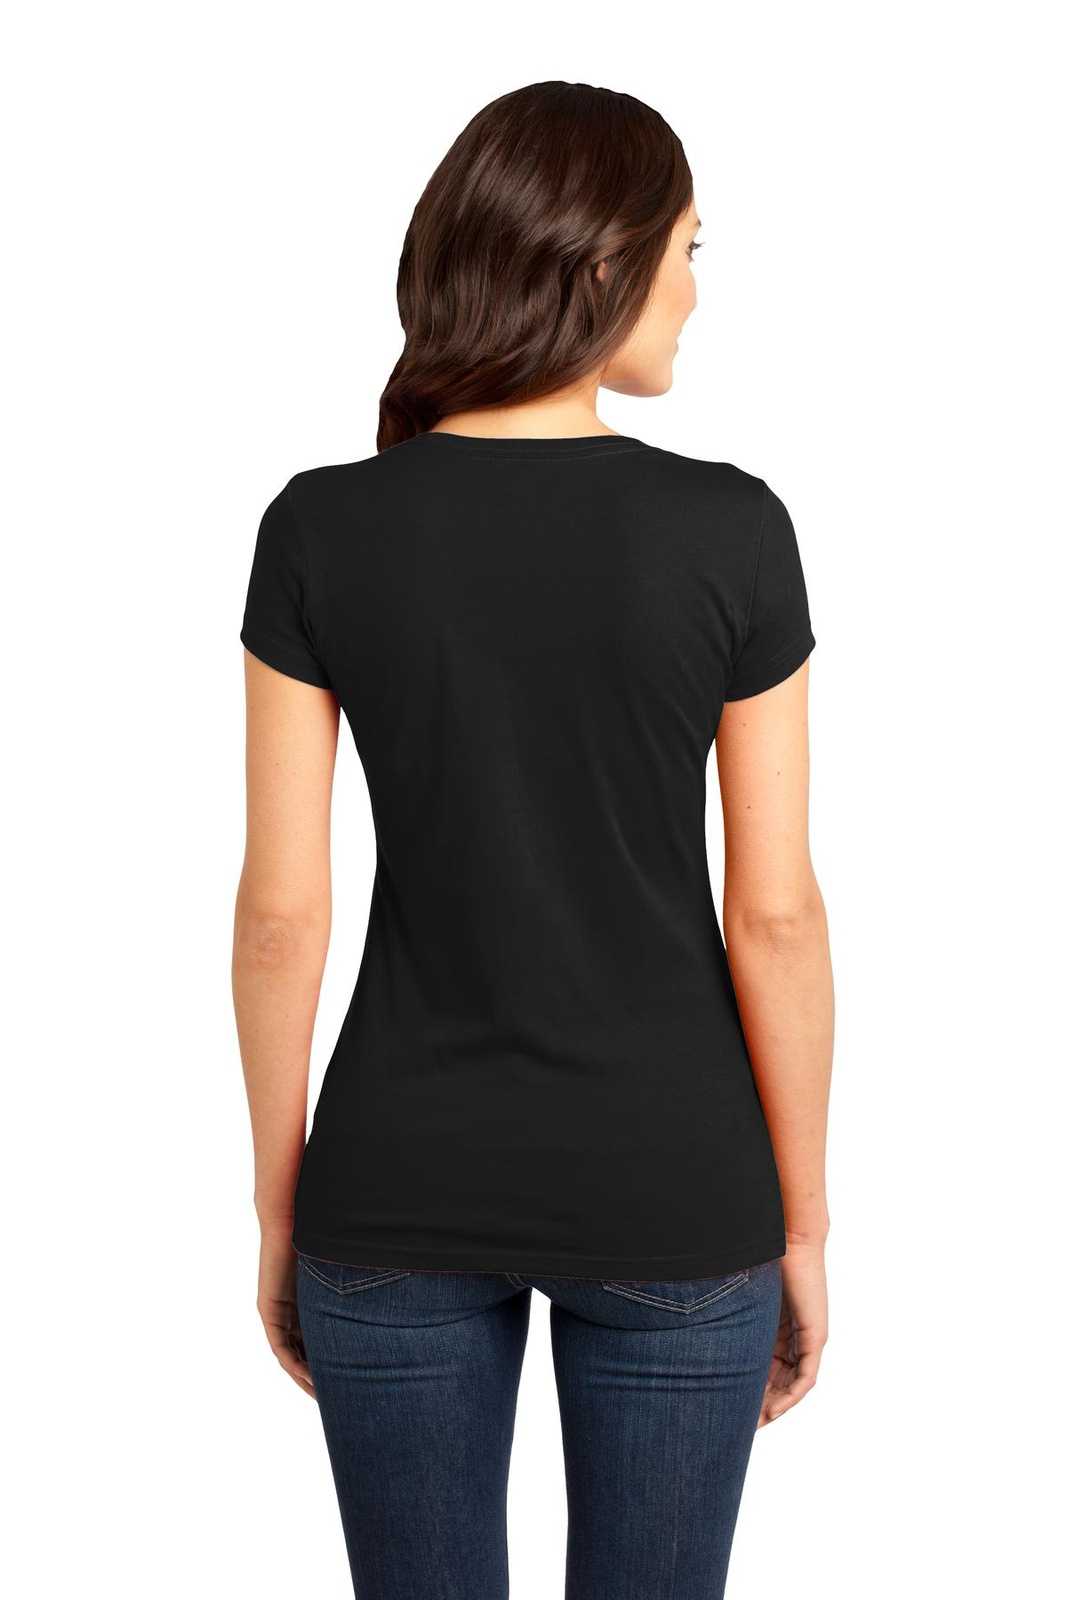 District DT6001 Women's Fitted Very Important Tee - Black - HIT a Double - 1